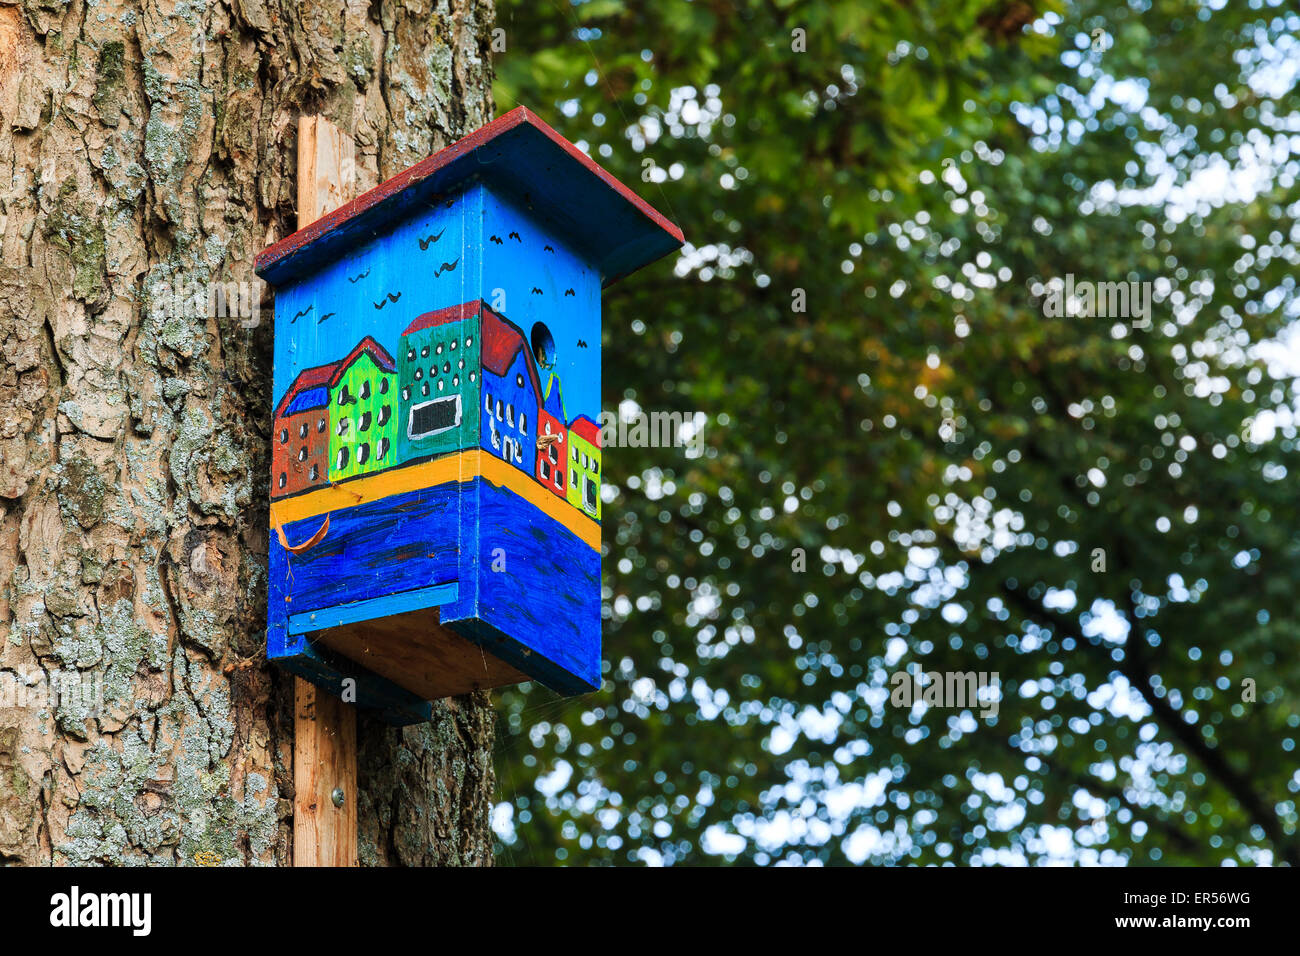 Colorful birdhouse showing canal houses in Amsterdam. Side view showing leafs tree in unsharp background. Stock Photo